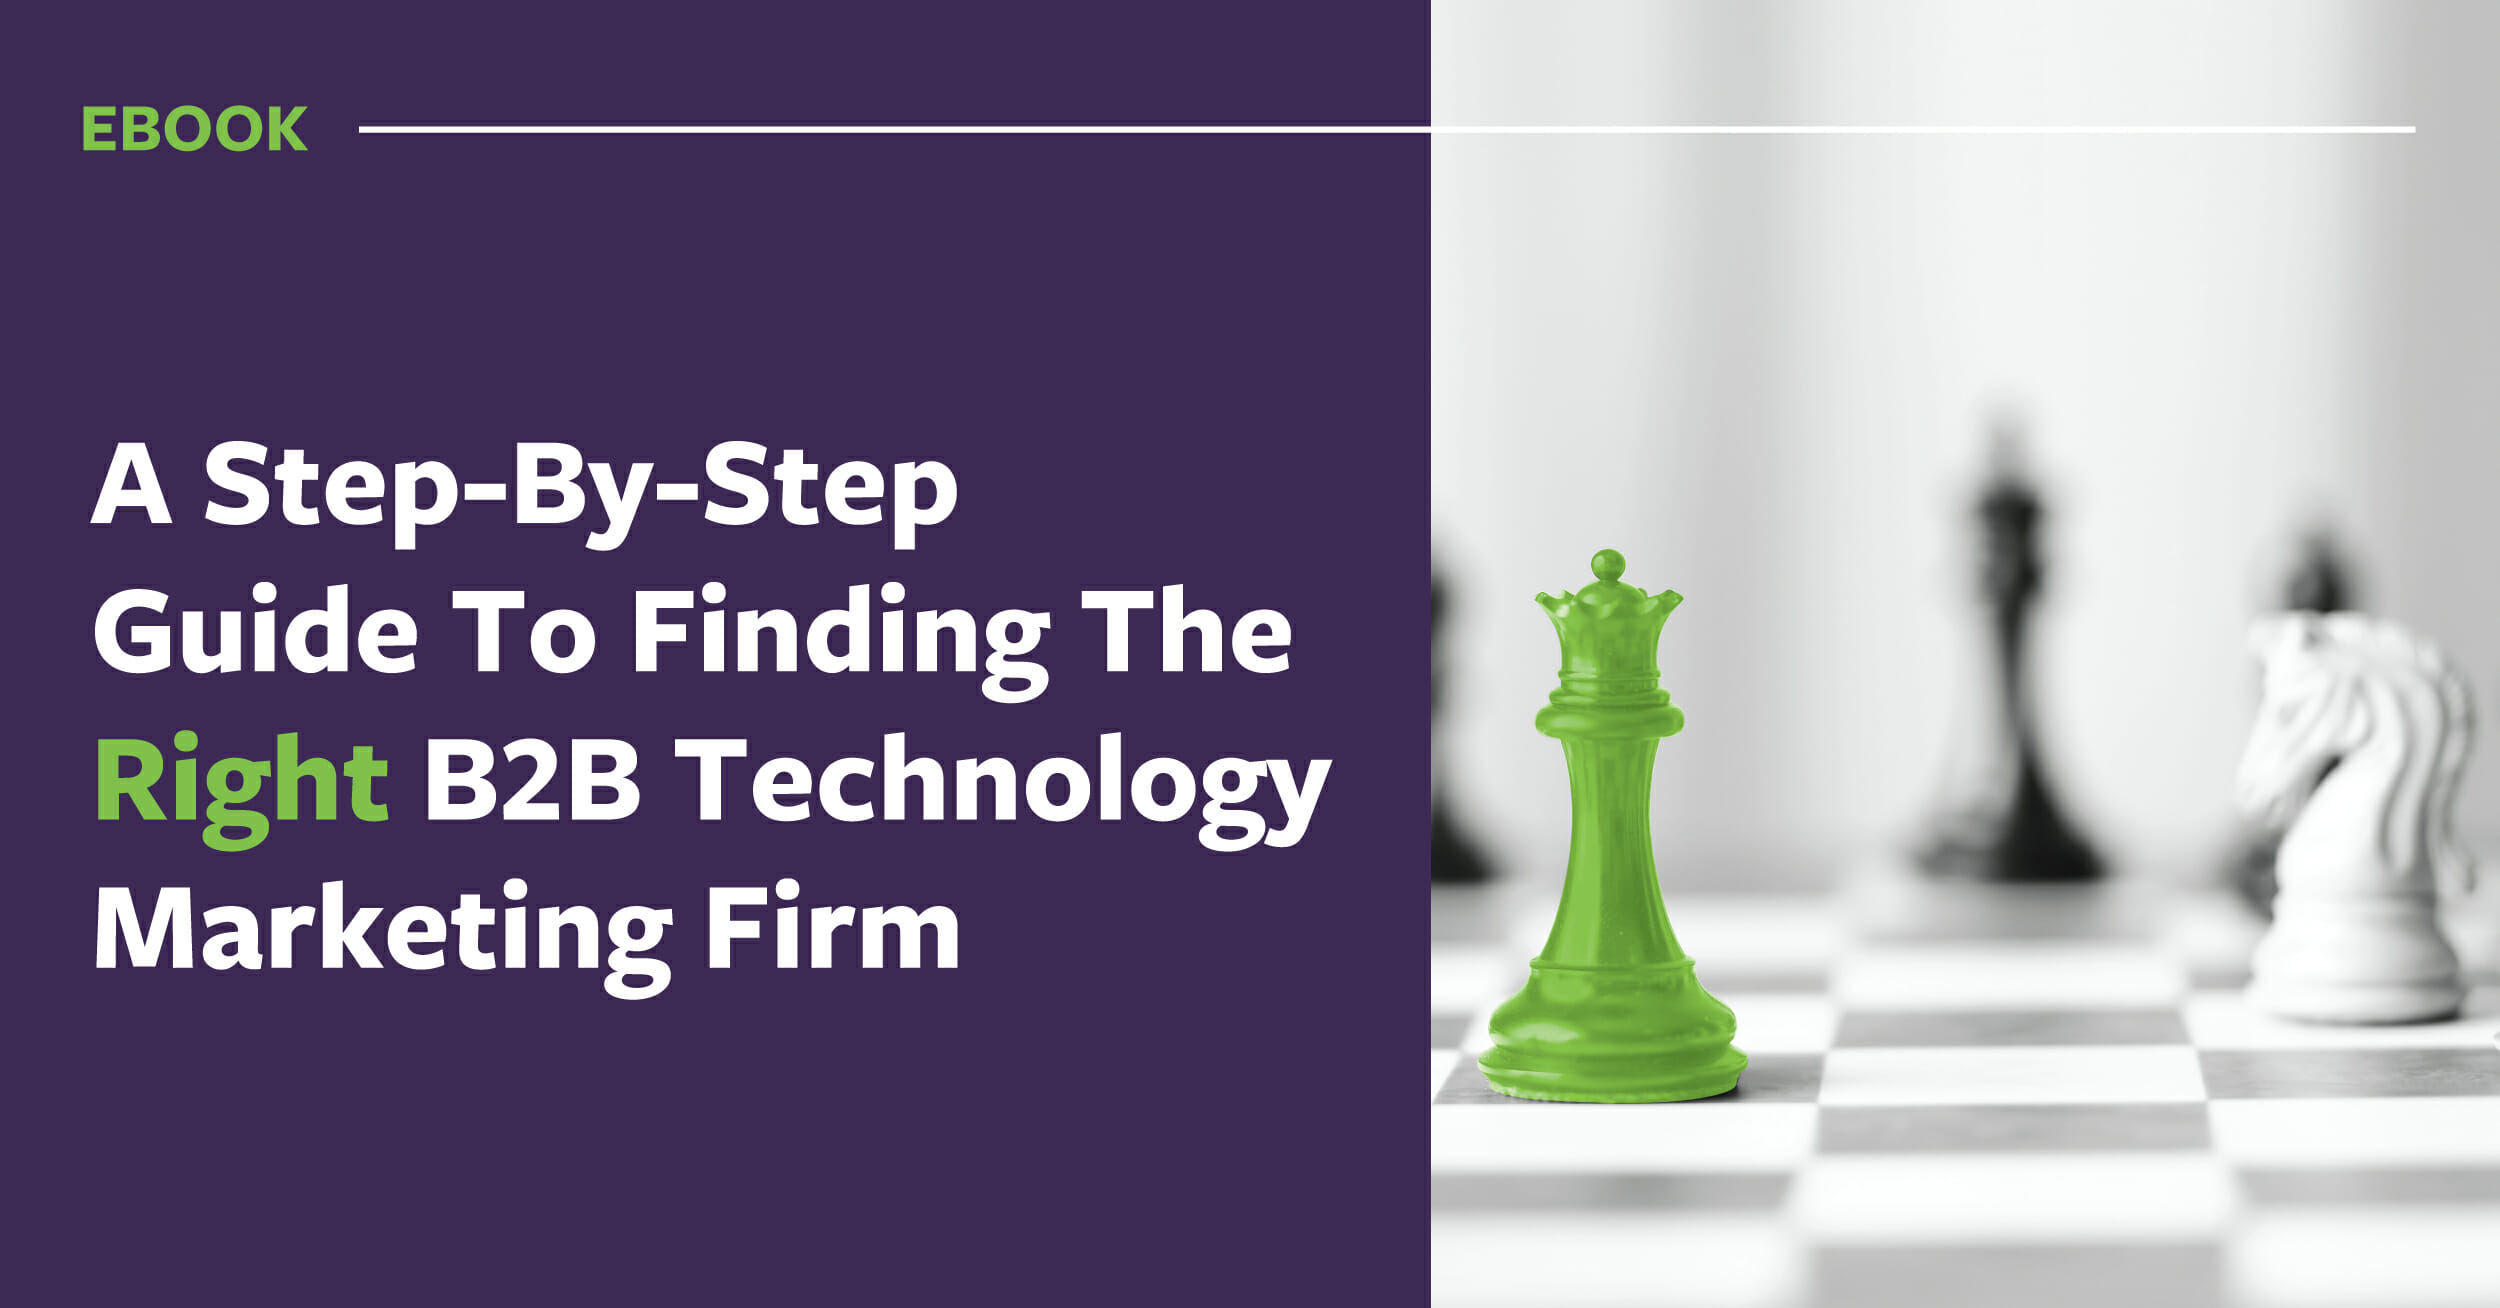 [eBook] A Step-By-Step Guide To Finding The Right B2B Technology Marketing Firm